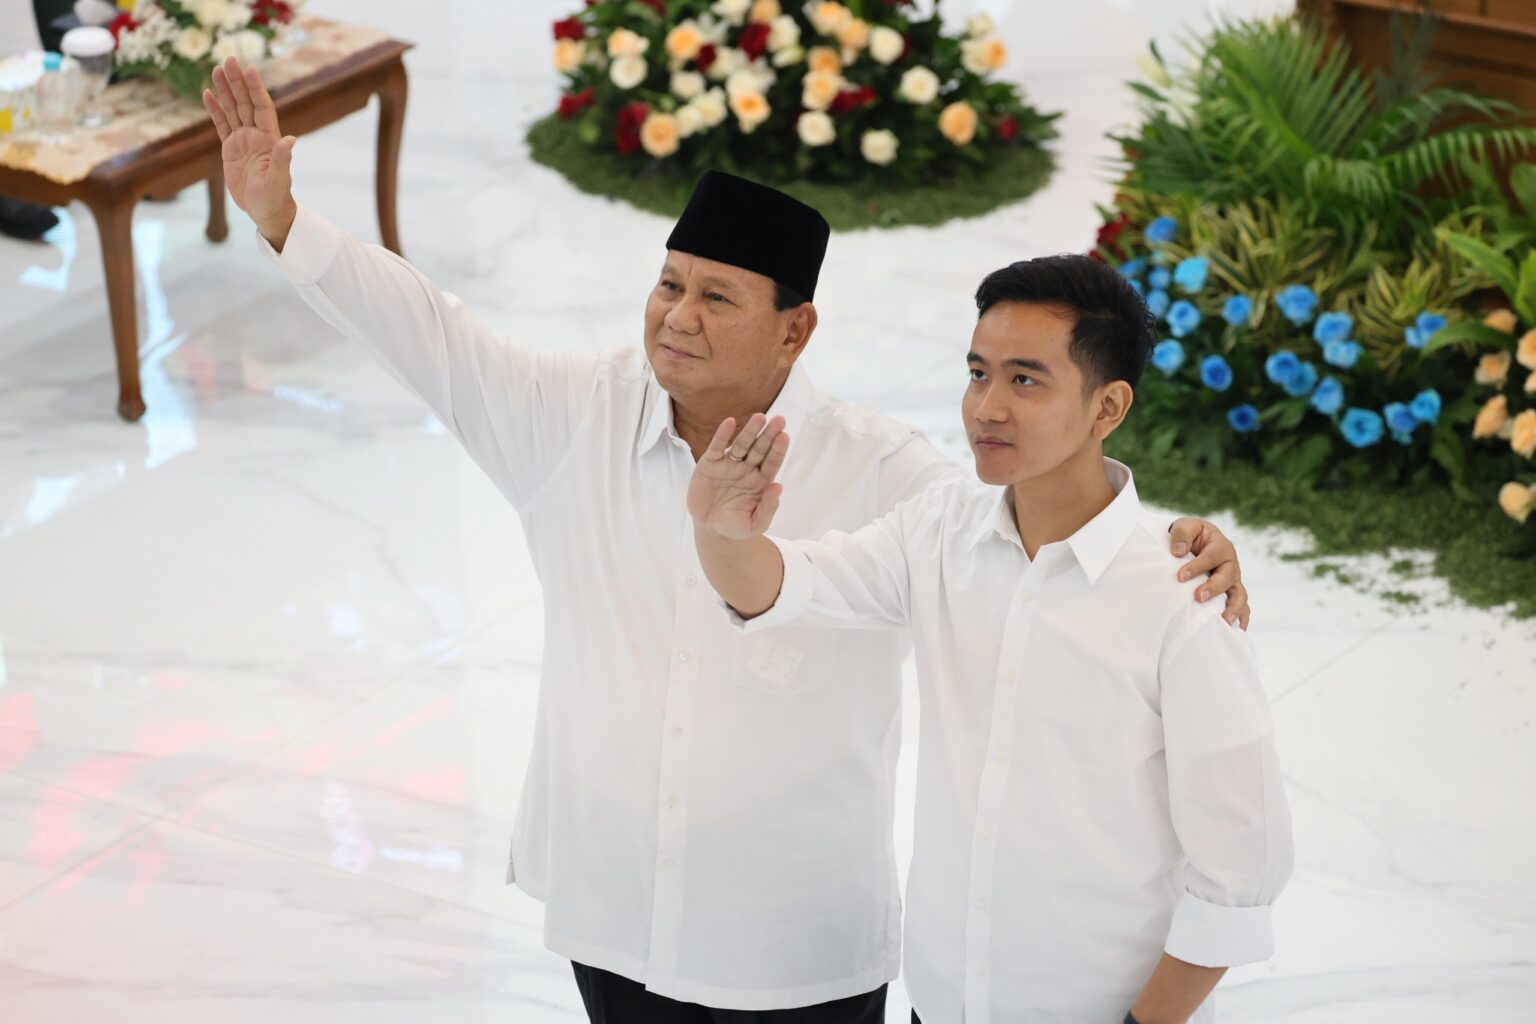 Prabowo-Gibran Officially Declared by the Election Commission as the Elected President and Vice President